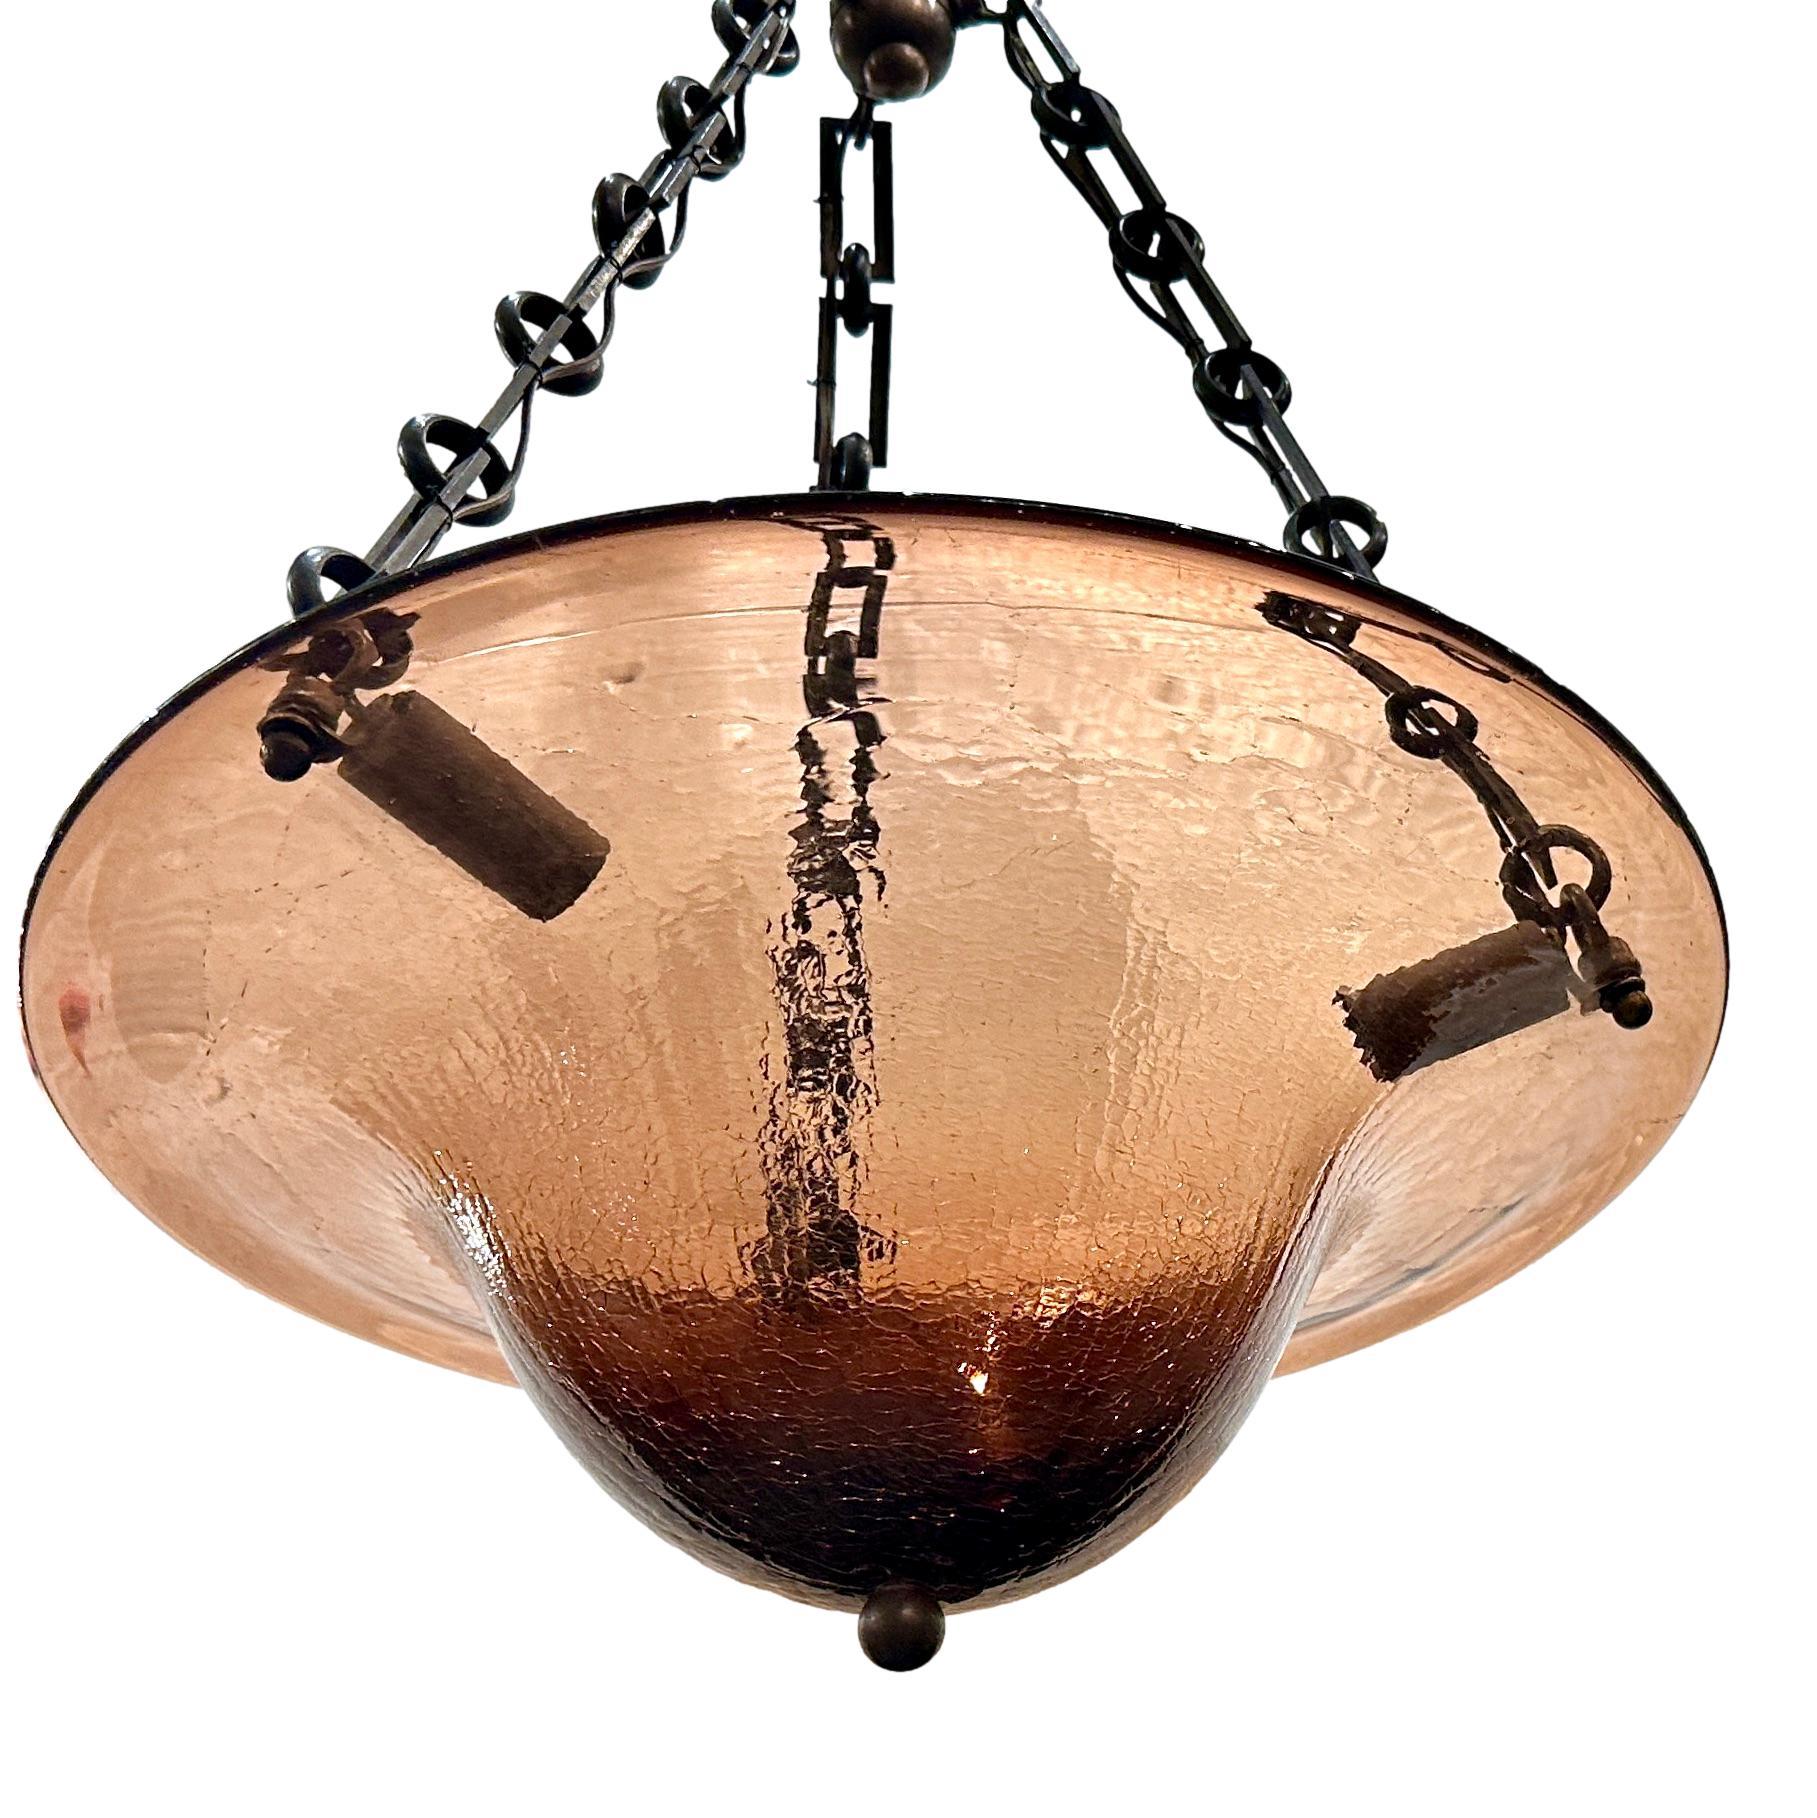 A circa 1950's Italian blown and crackled glass light fixture with 3 interior lights.

Measurements:
Drop: 26